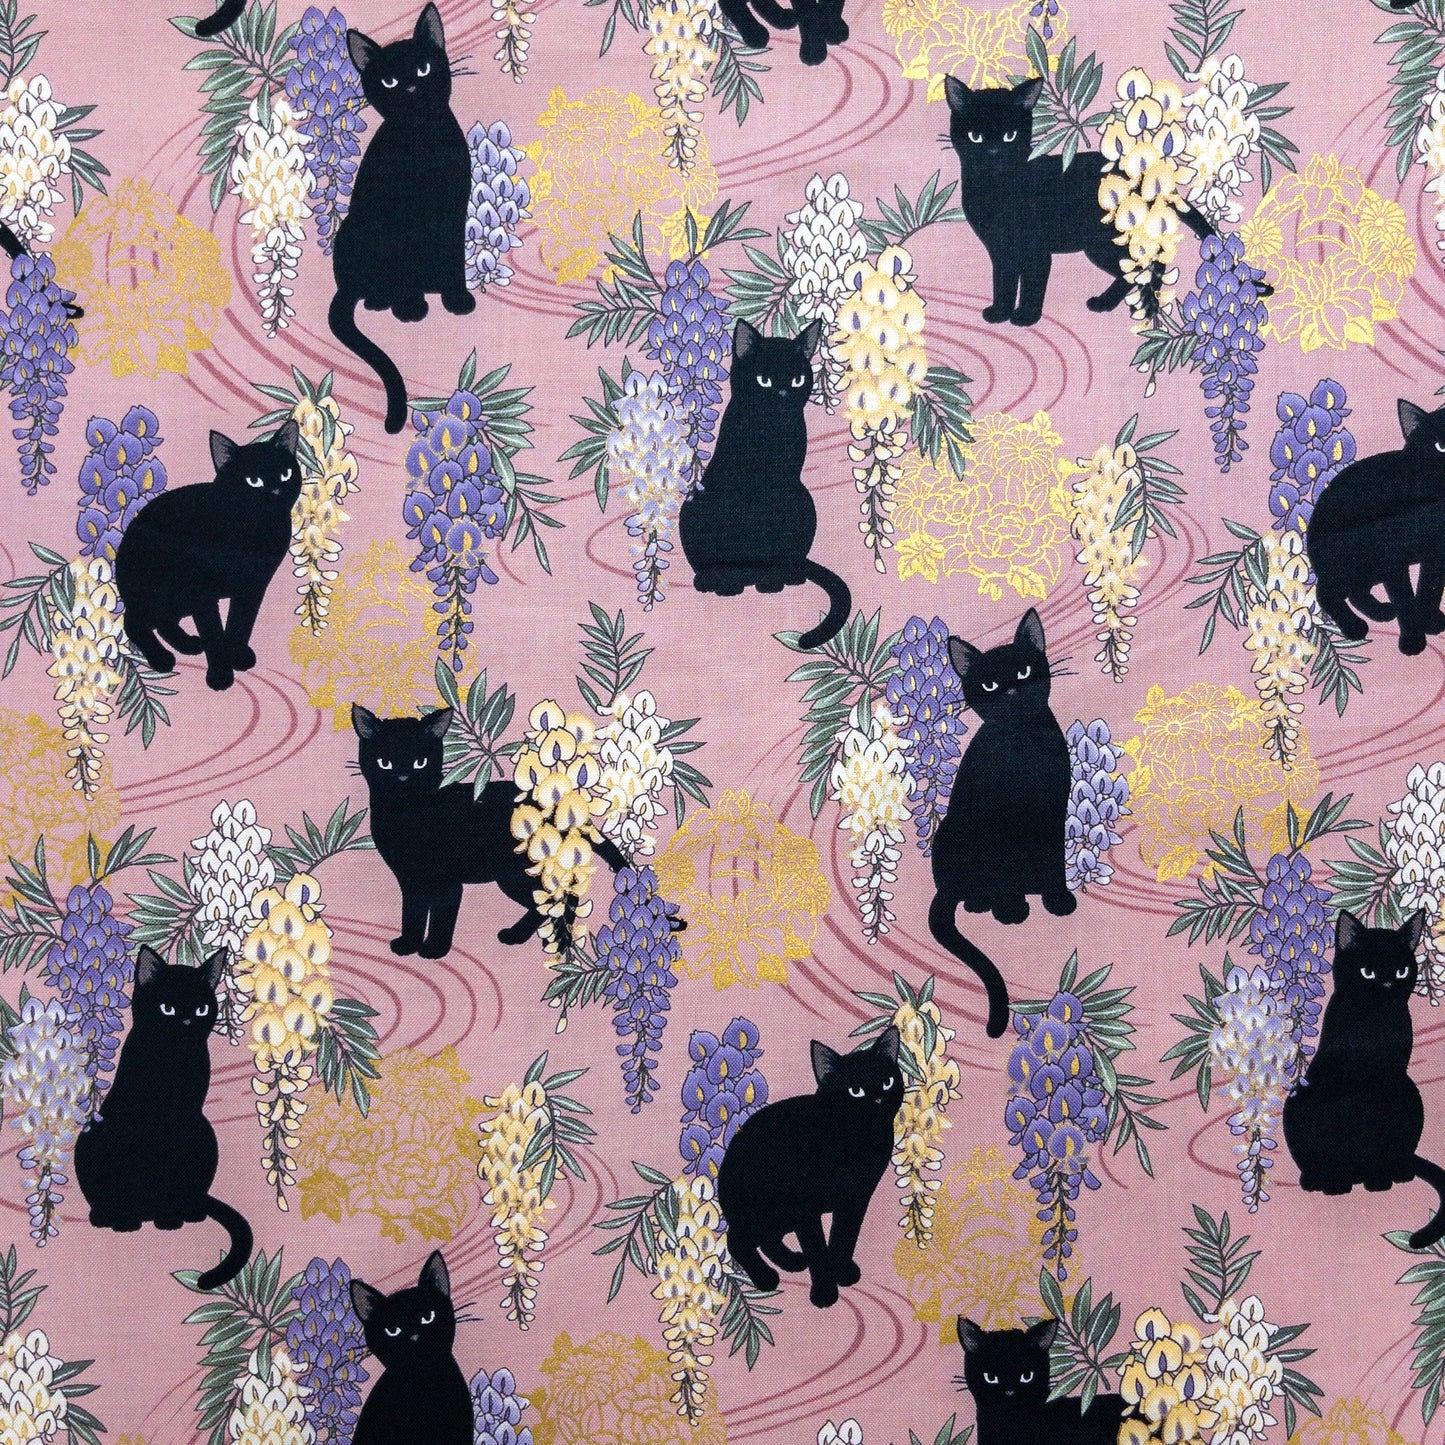 Quilt Gate | bronzing wisteria flowers and black cats 燙金紫藤花黑貓 | cotton printed sheeting 純棉